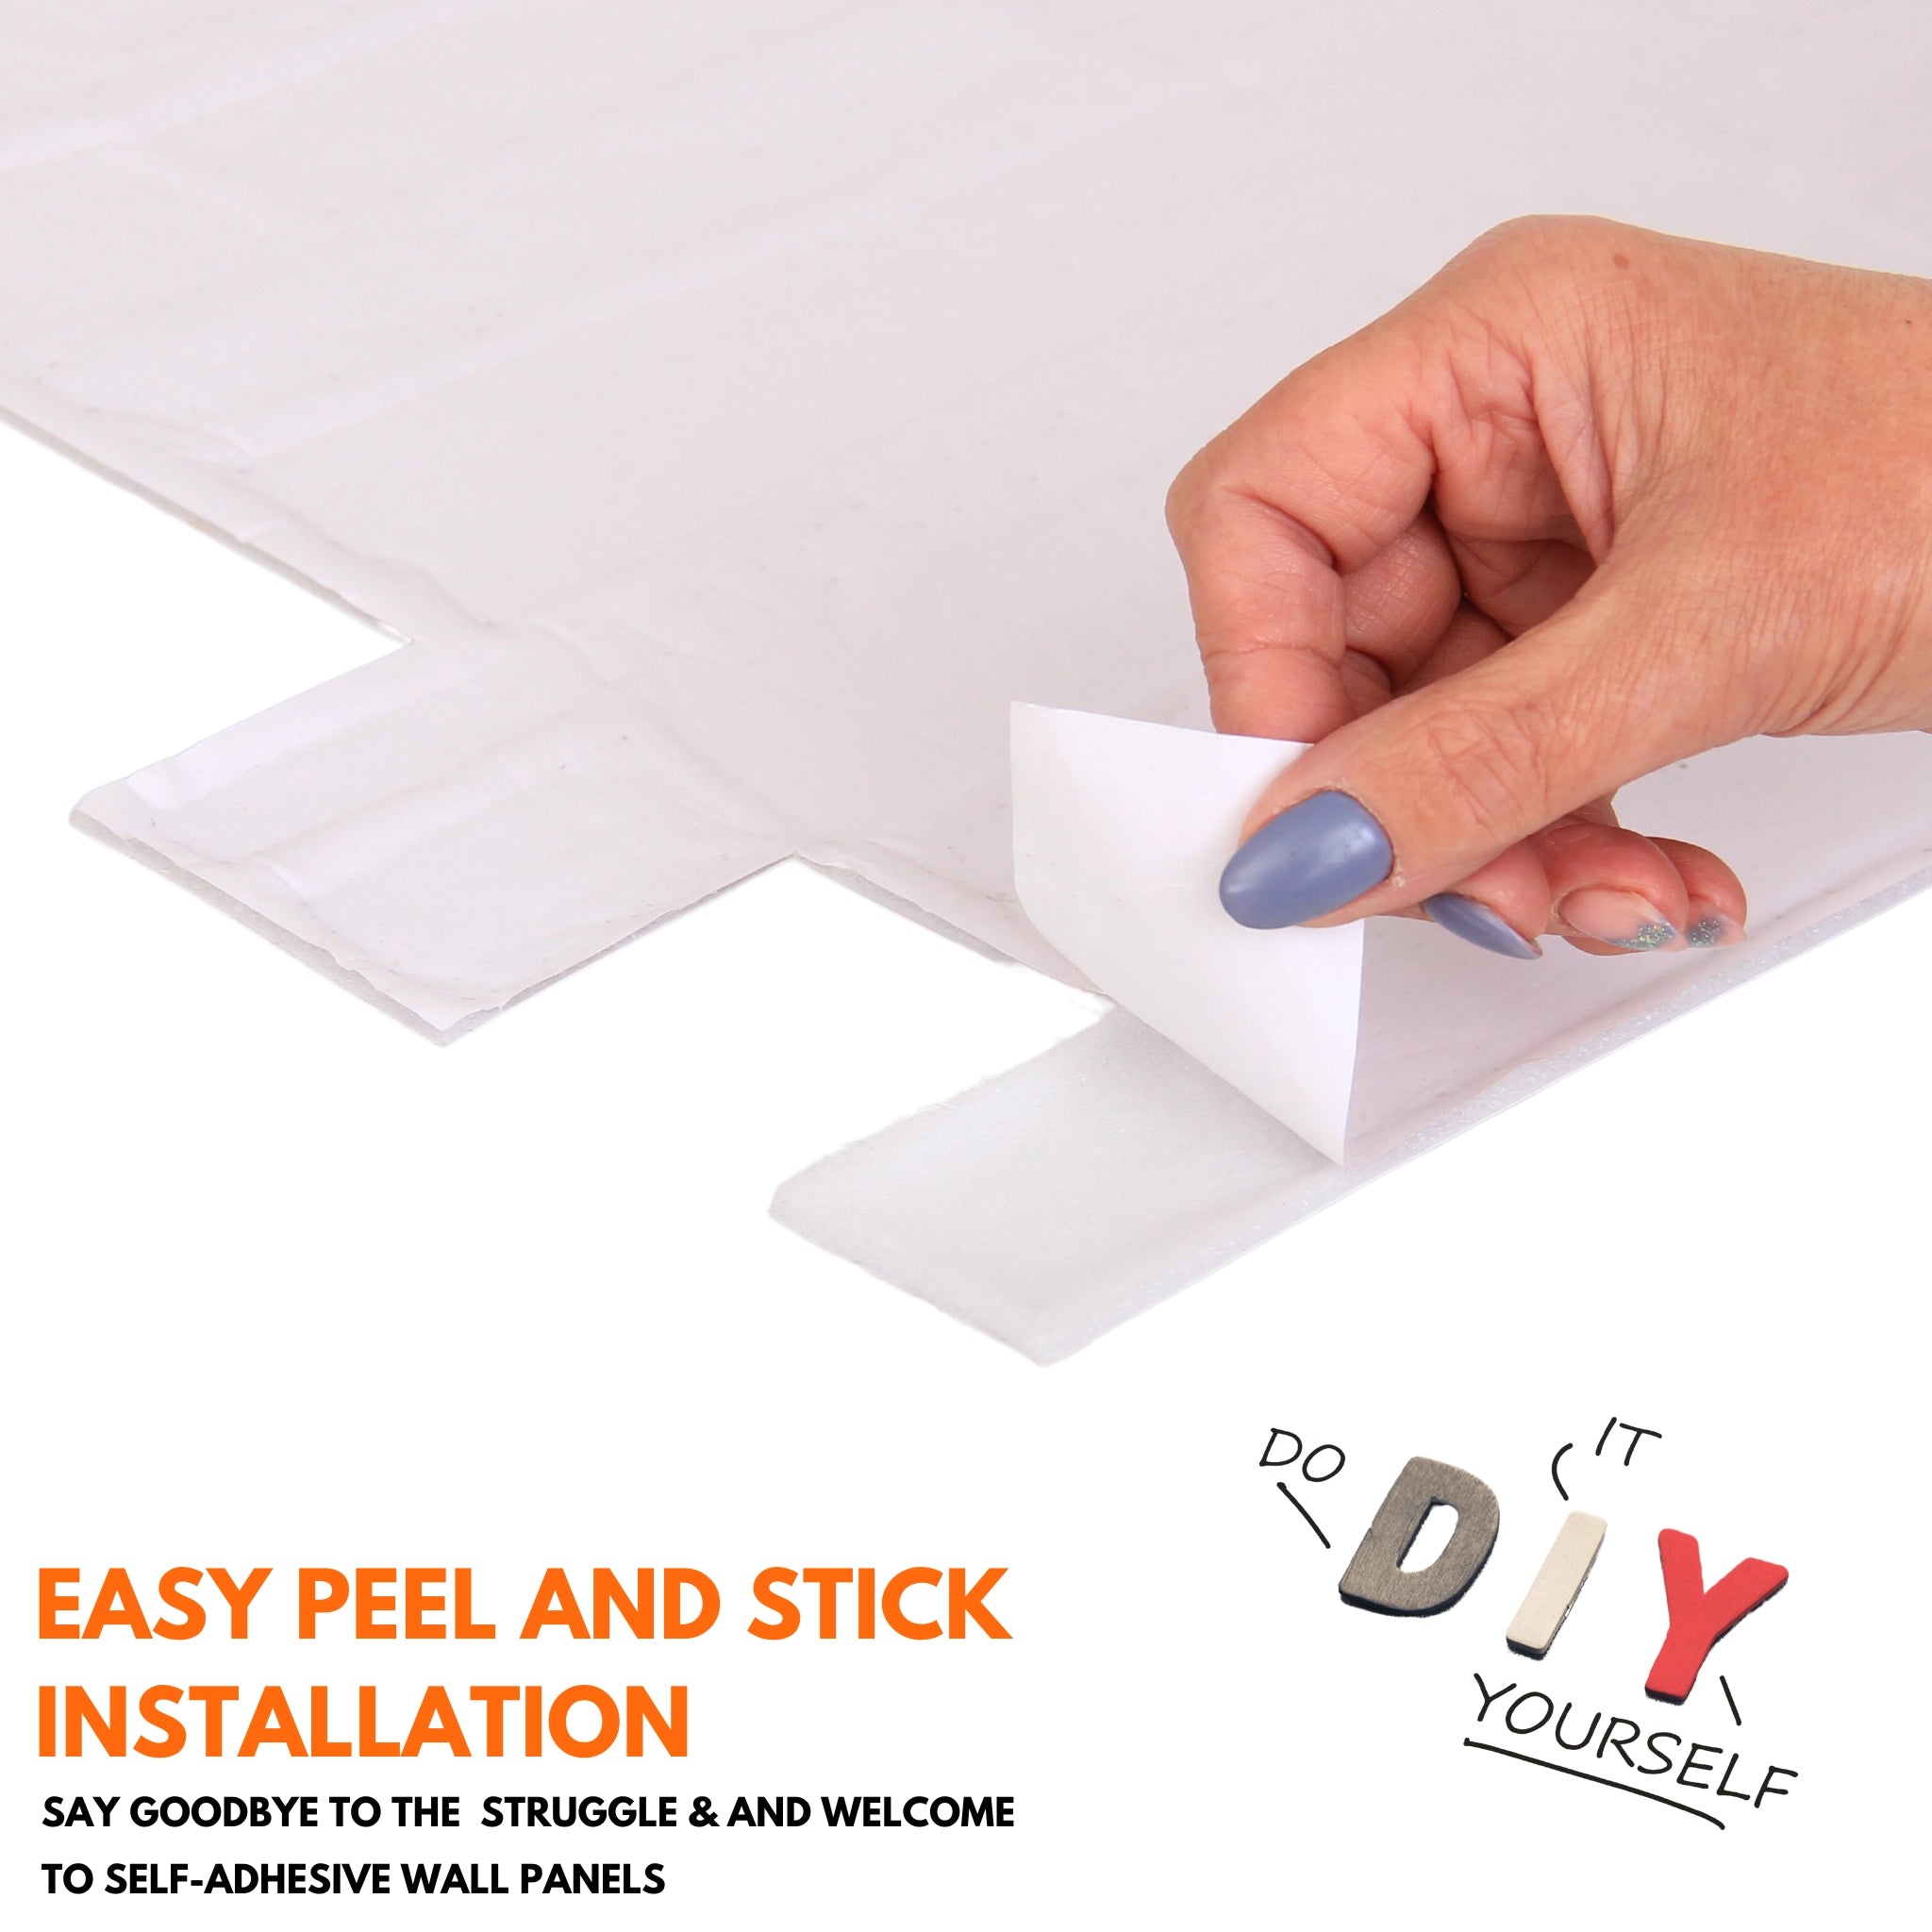 Instant Nails adhesive and wall panel installation guide on red brick background